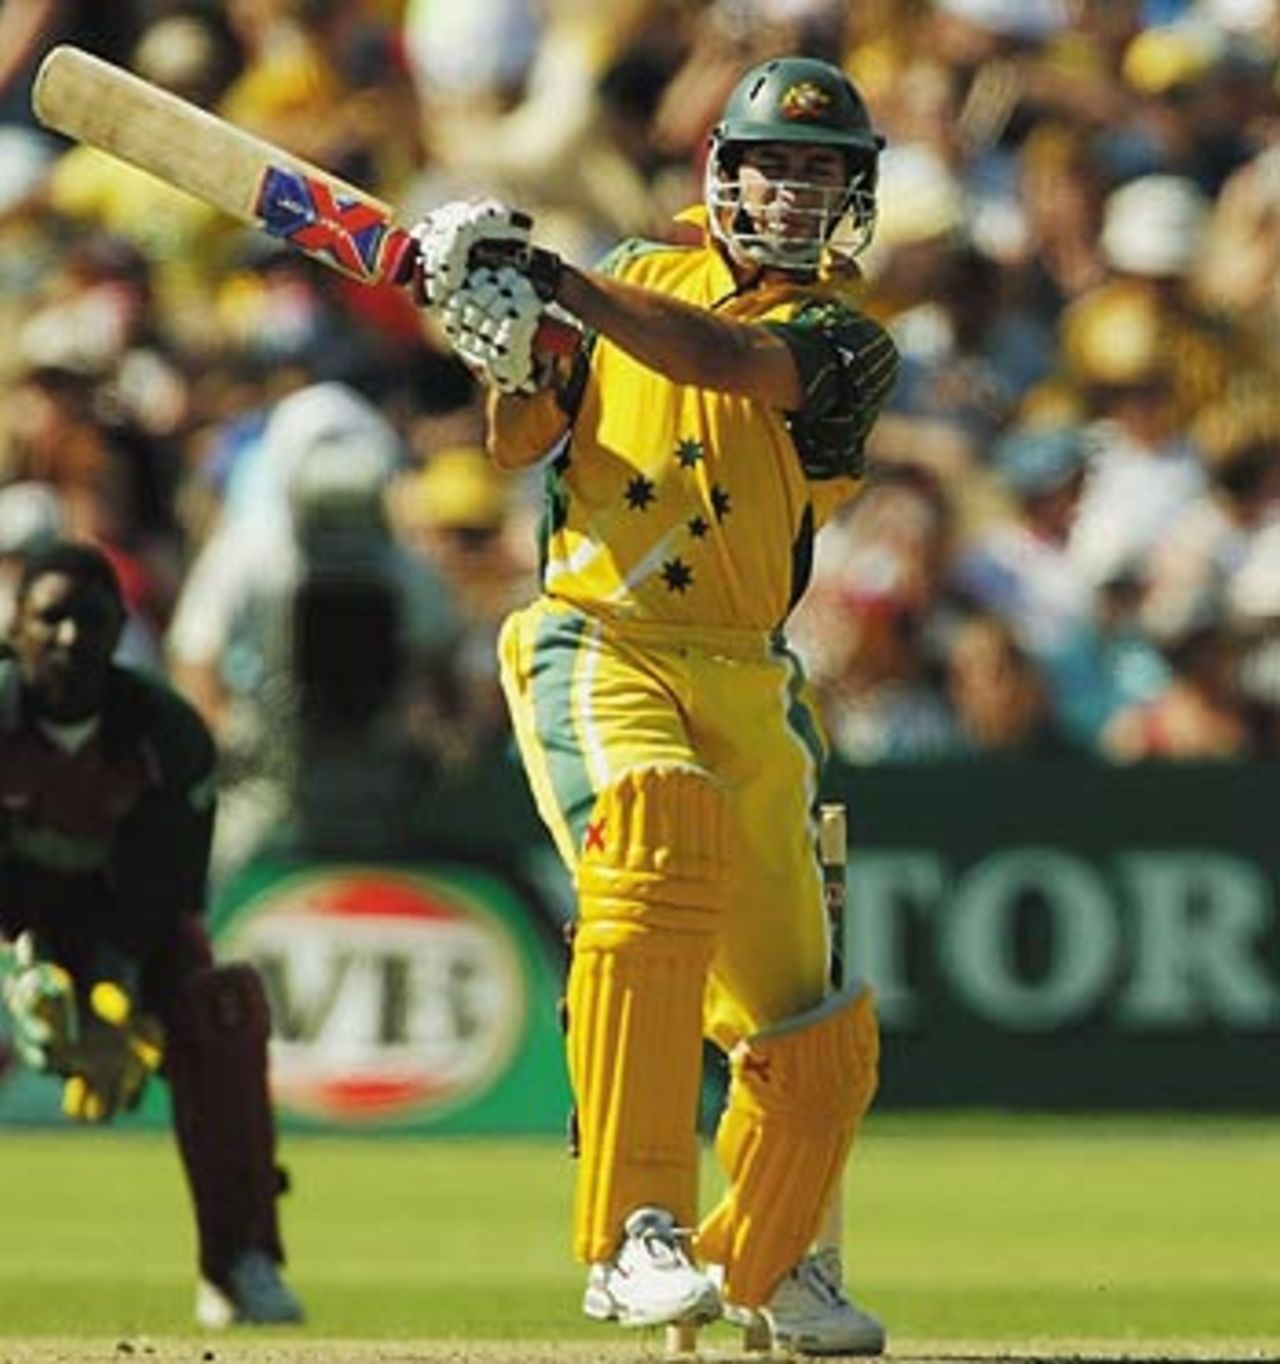 Michael Bevan joins Ponting in setting up a solid foundation, Australia v Zimbabwe, VB Series, 9th ODI, Adelaide, January 26, 2004